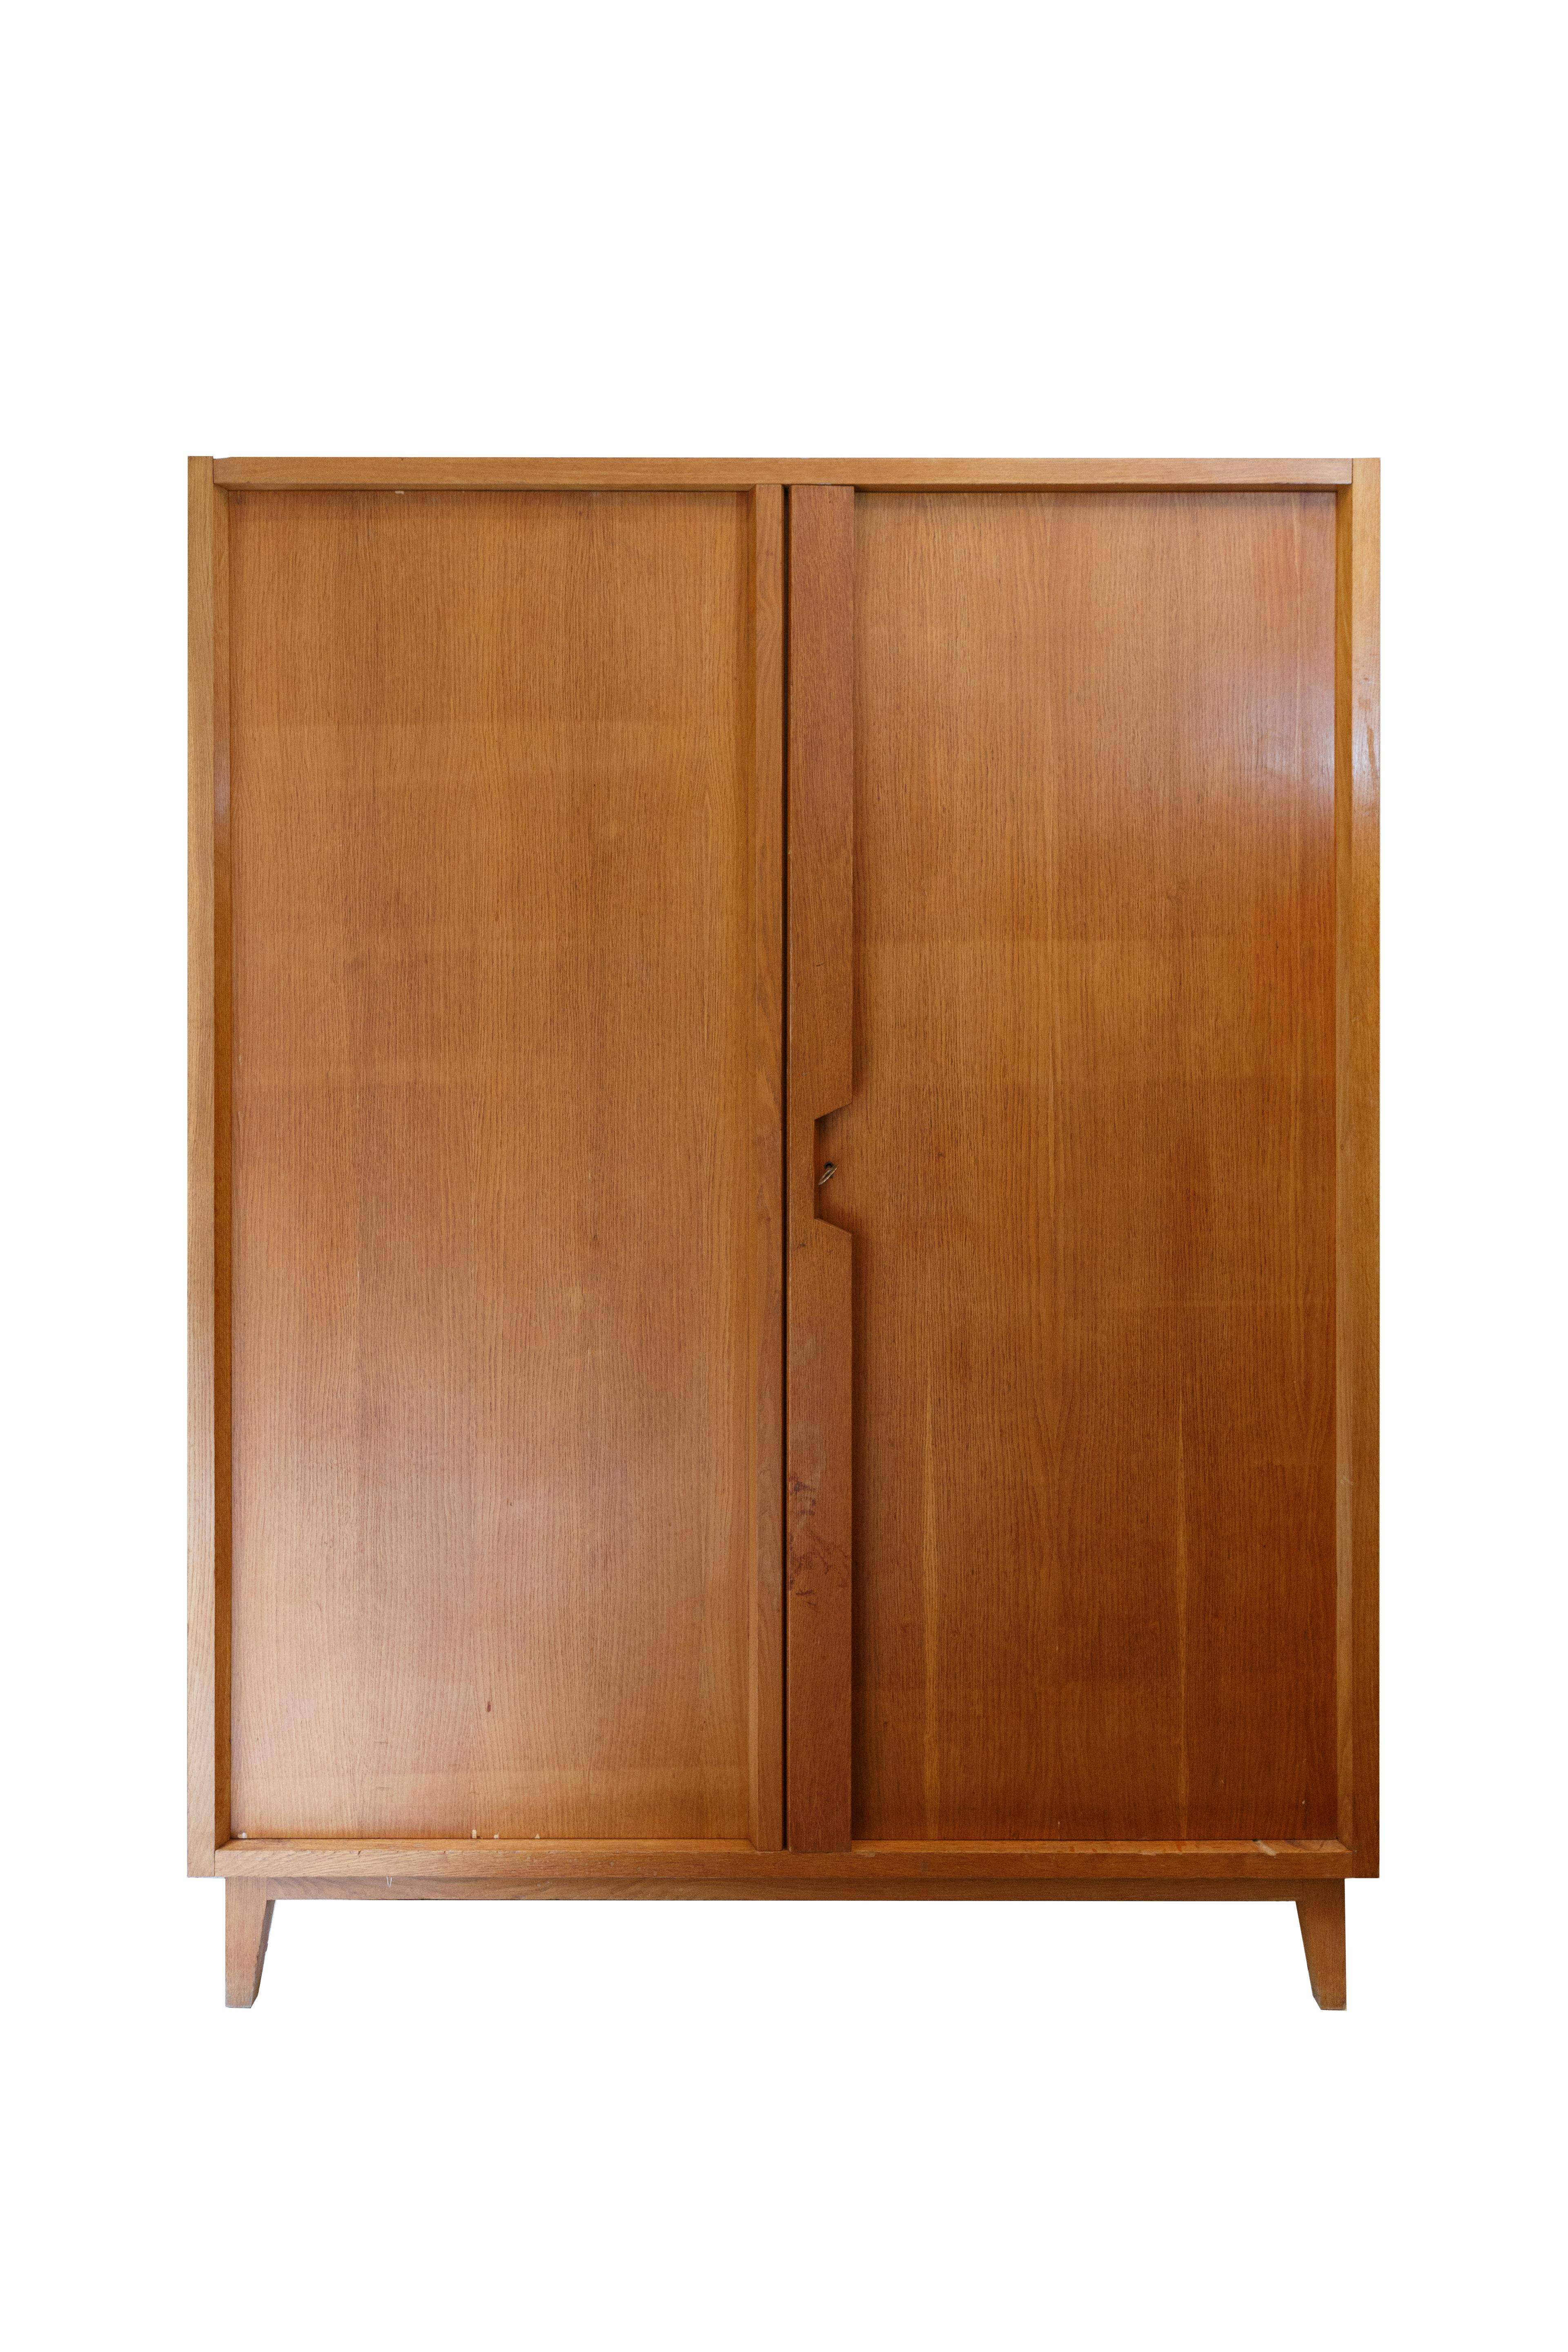 Mid-Century Modern satinwood wardrobe with shelves and draws in the style of Gio Ponti.
Pair of elegant furniture with an essential line, rationally constructed, removable and interlocking , can be used as wardrobes as containers both in bedrooms